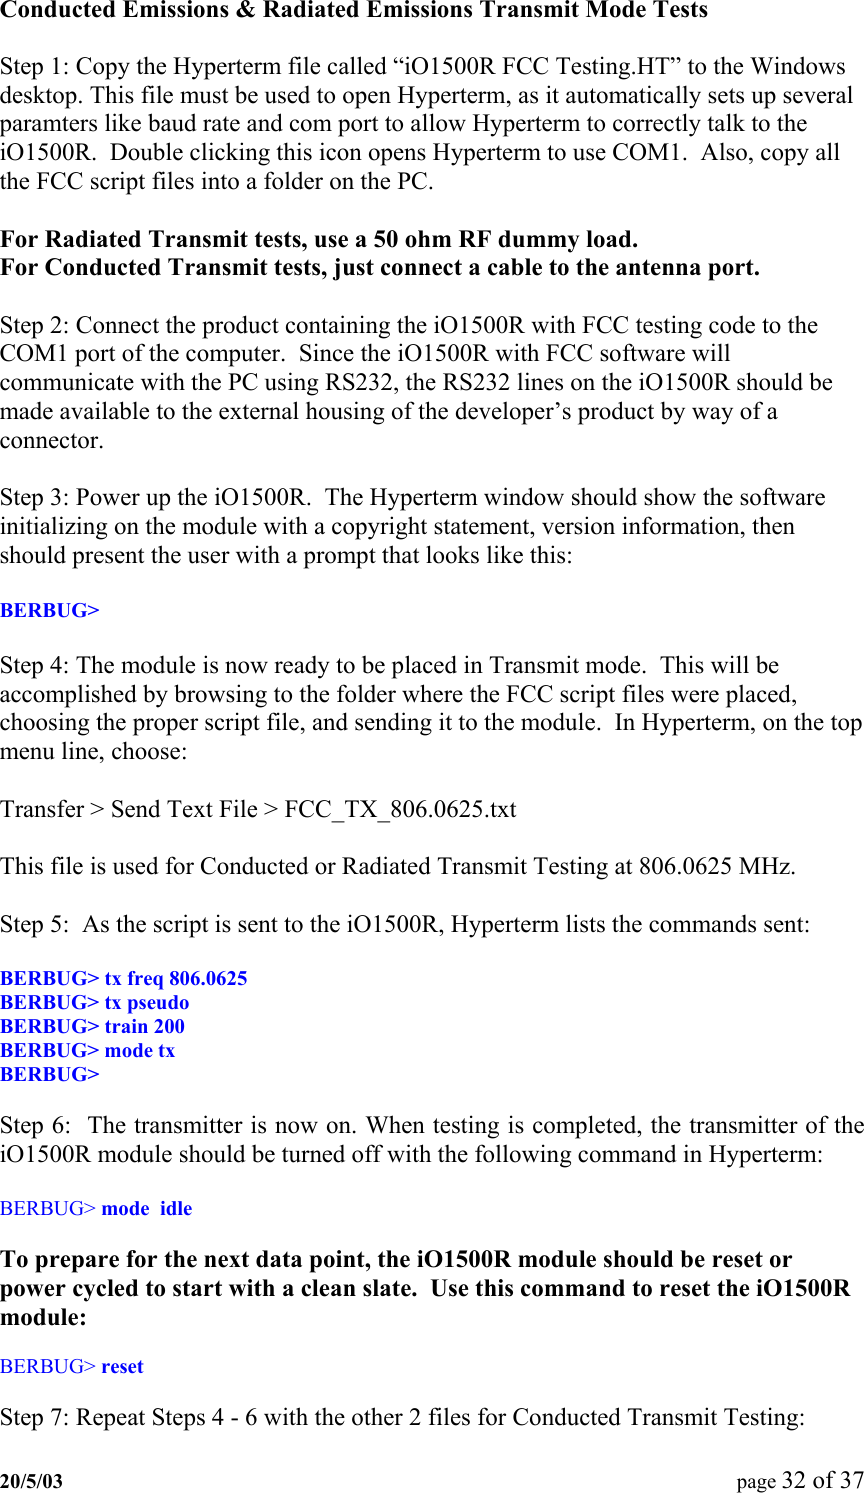 Conducted Emissions &amp; Radiated Emissions Transmit Mode Tests  Step 1: Copy the Hyperterm file called “iO1500R FCC Testing.HT” to the Windows desktop. This file must be used to open Hyperterm, as it automatically sets up several paramters like baud rate and com port to allow Hyperterm to correctly talk to the iO1500R.  Double clicking this icon opens Hyperterm to use COM1.  Also, copy all the FCC script files into a folder on the PC.  For Radiated Transmit tests, use a 50 ohm RF dummy load. For Conducted Transmit tests, just connect a cable to the antenna port.  Step 2: Connect the product containing the iO1500R with FCC testing code to the COM1 port of the computer.  Since the iO1500R with FCC software will communicate with the PC using RS232, the RS232 lines on the iO1500R should be made available to the external housing of the developer’s product by way of a connector.  Step 3: Power up the iO1500R.  The Hyperterm window should show the software initializing on the module with a copyright statement, version information, then should present the user with a prompt that looks like this:  BERBUG&gt;   Step 4: The module is now ready to be placed in Transmit mode.  This will be accomplished by browsing to the folder where the FCC script files were placed, choosing the proper script file, and sending it to the module.  In Hyperterm, on the top menu line, choose:  Transfer &gt; Send Text File &gt; FCC_TX_806.0625.txt  This file is used for Conducted or Radiated Transmit Testing at 806.0625 MHz.  Step 5:  As the script is sent to the iO1500R, Hyperterm lists the commands sent:  BERBUG&gt; tx freq 806.0625 BERBUG&gt; tx pseudo BERBUG&gt; train 200 BERBUG&gt; mode tx BERBUG&gt;  Step 6:  The transmitter is now on. When testing is completed, the transmitter of the iO1500R module should be turned off with the following command in Hyperterm:  BERBUG&gt; mode  idle  To prepare for the next data point, the iO1500R module should be reset or power cycled to start with a clean slate.  Use this command to reset the iO1500R module:  BERBUG&gt; reset  Step 7: Repeat Steps 4 - 6 with the other 2 files for Conducted Transmit Testing:   20/5/03  page 32 of 37   